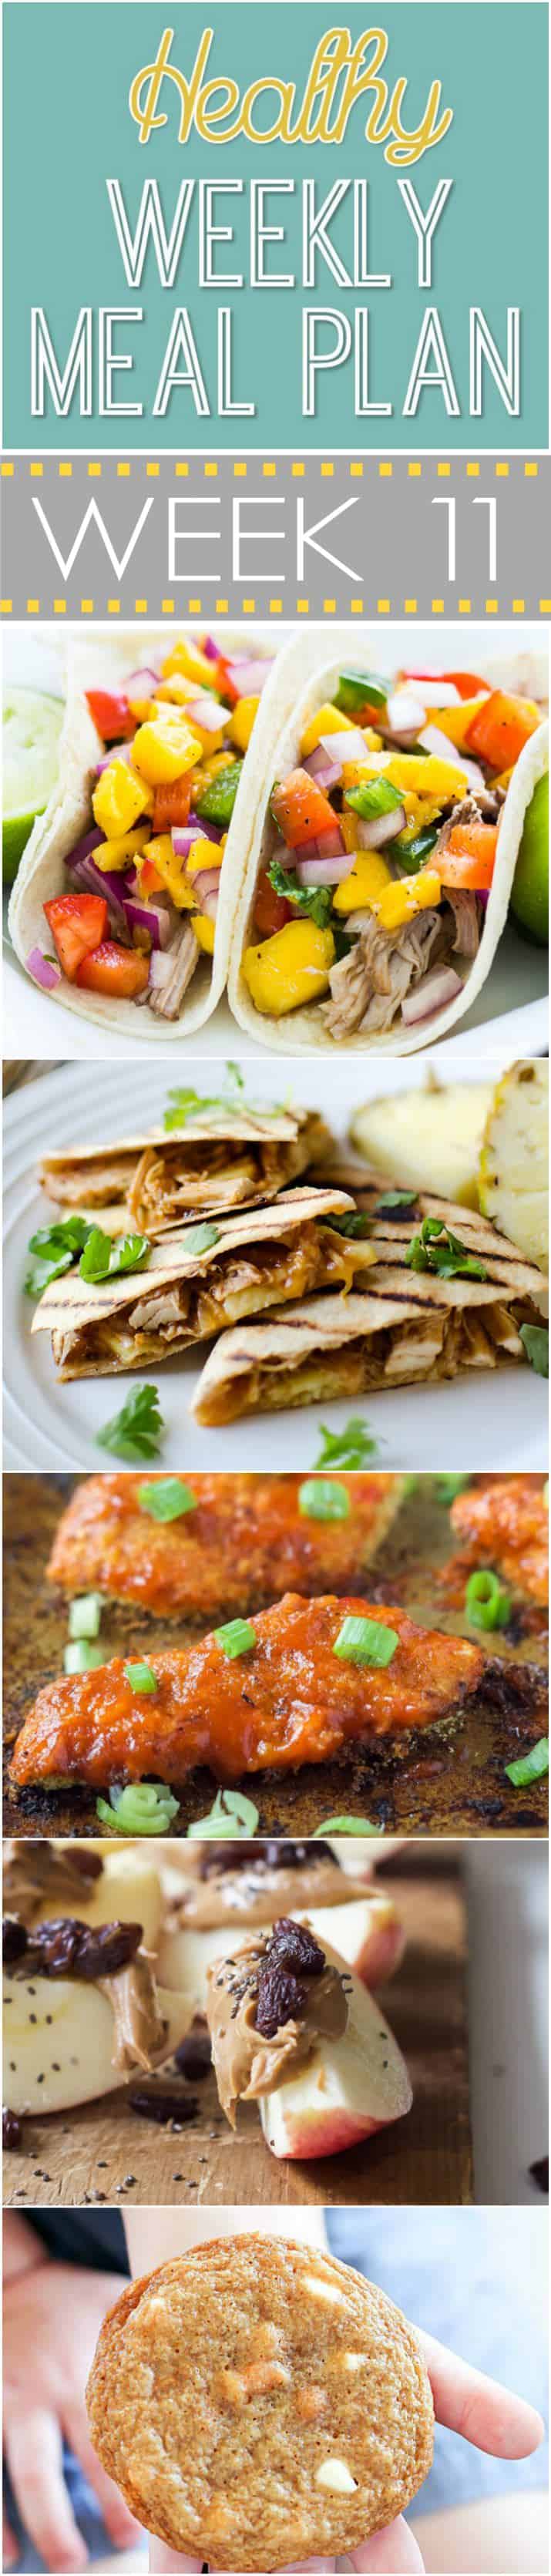 Our Healthy Meal Plan will help you navigate through the next week of meals to make school nights easy and healthy and something your family will absolutely love! Everything you need is in this meal plan, breakfast, lunch, dinner, snack, and desert for the week! | joyfulhealthyeats.com #recipes